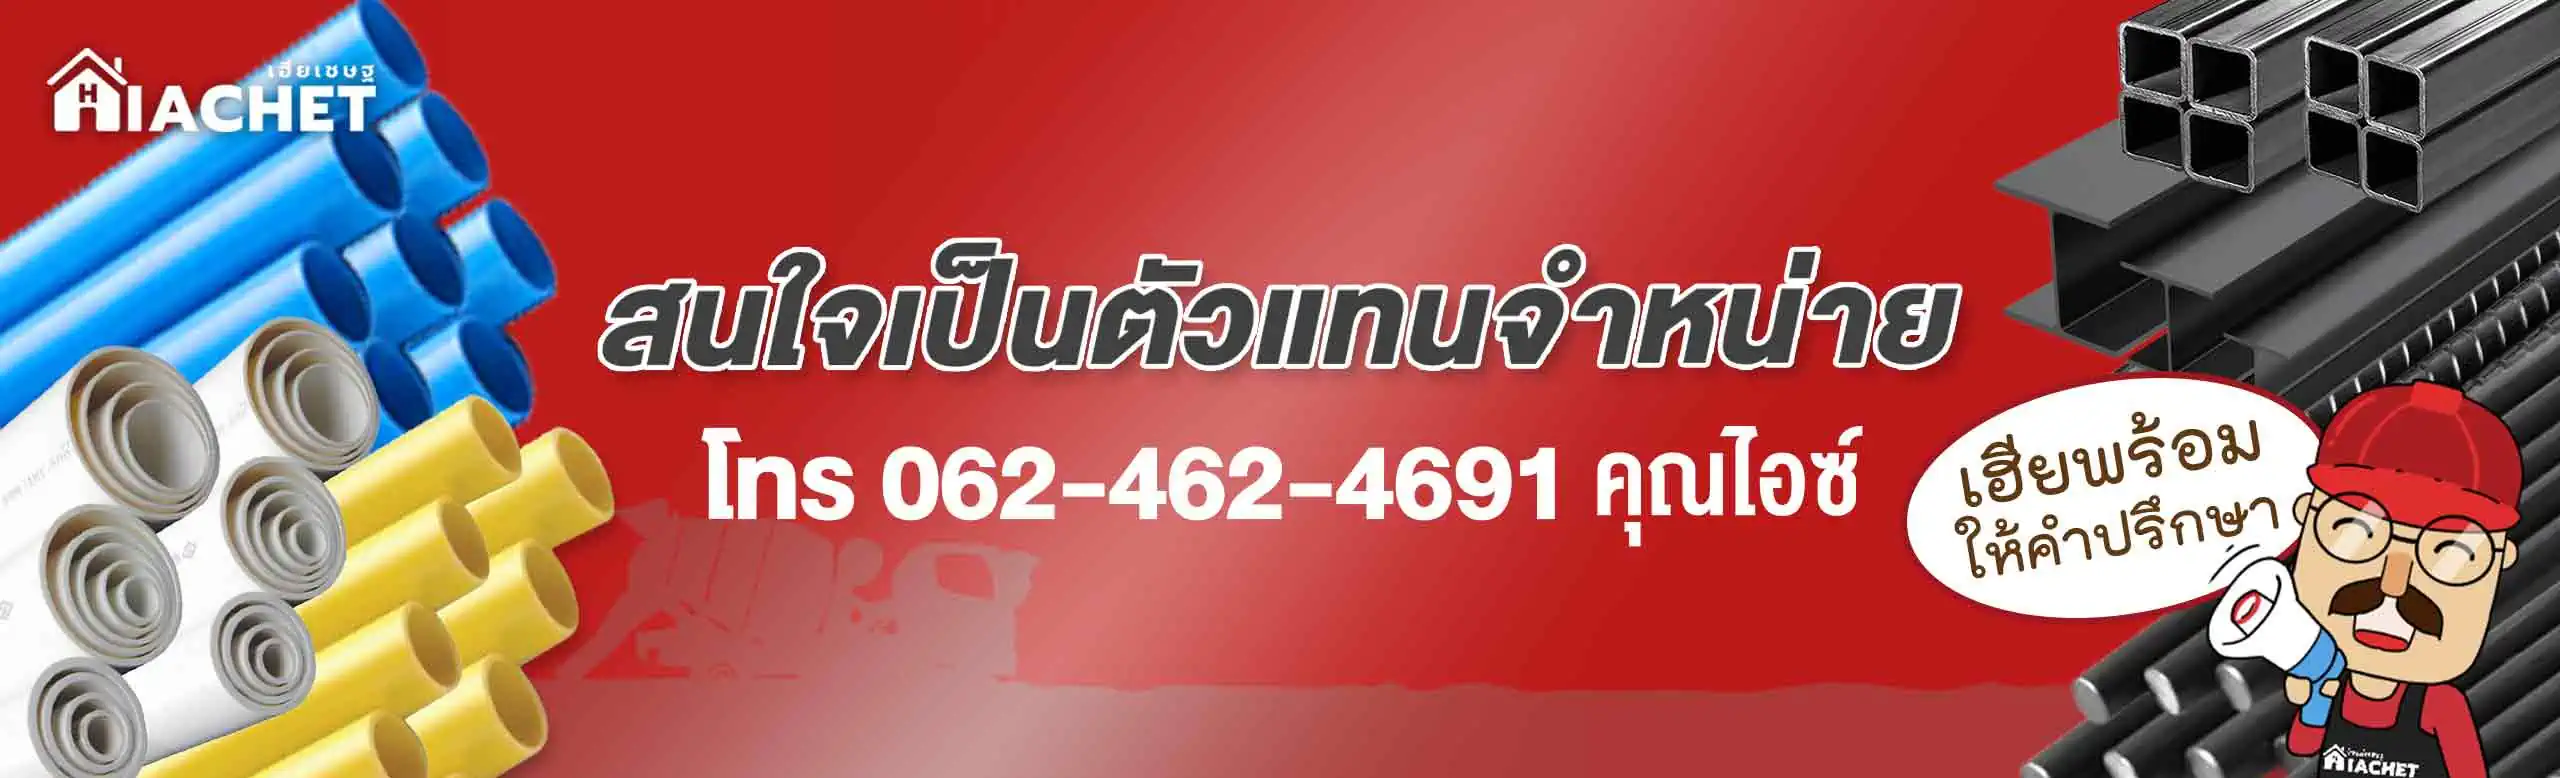 Banner-Contact agent - Mr. Ice-2560x778